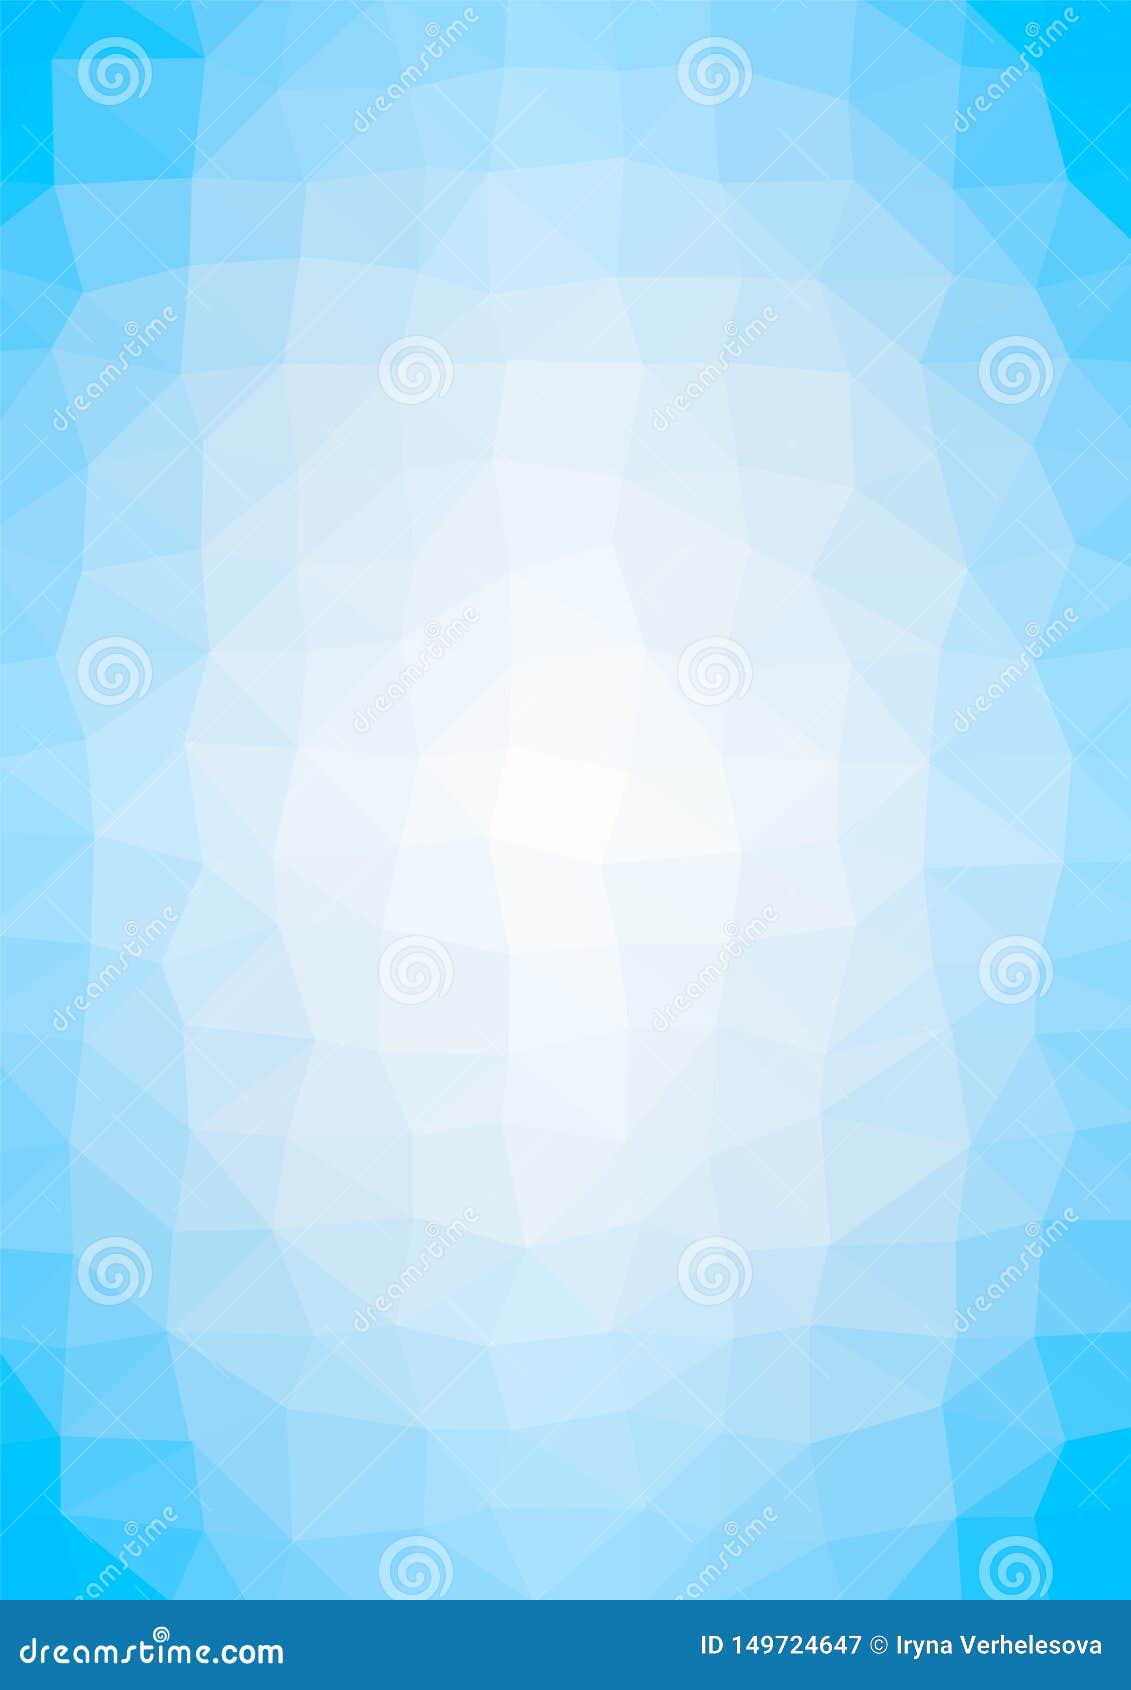 Vertical design with Blue background vertical Perfect for portrait-oriented photos or graphics